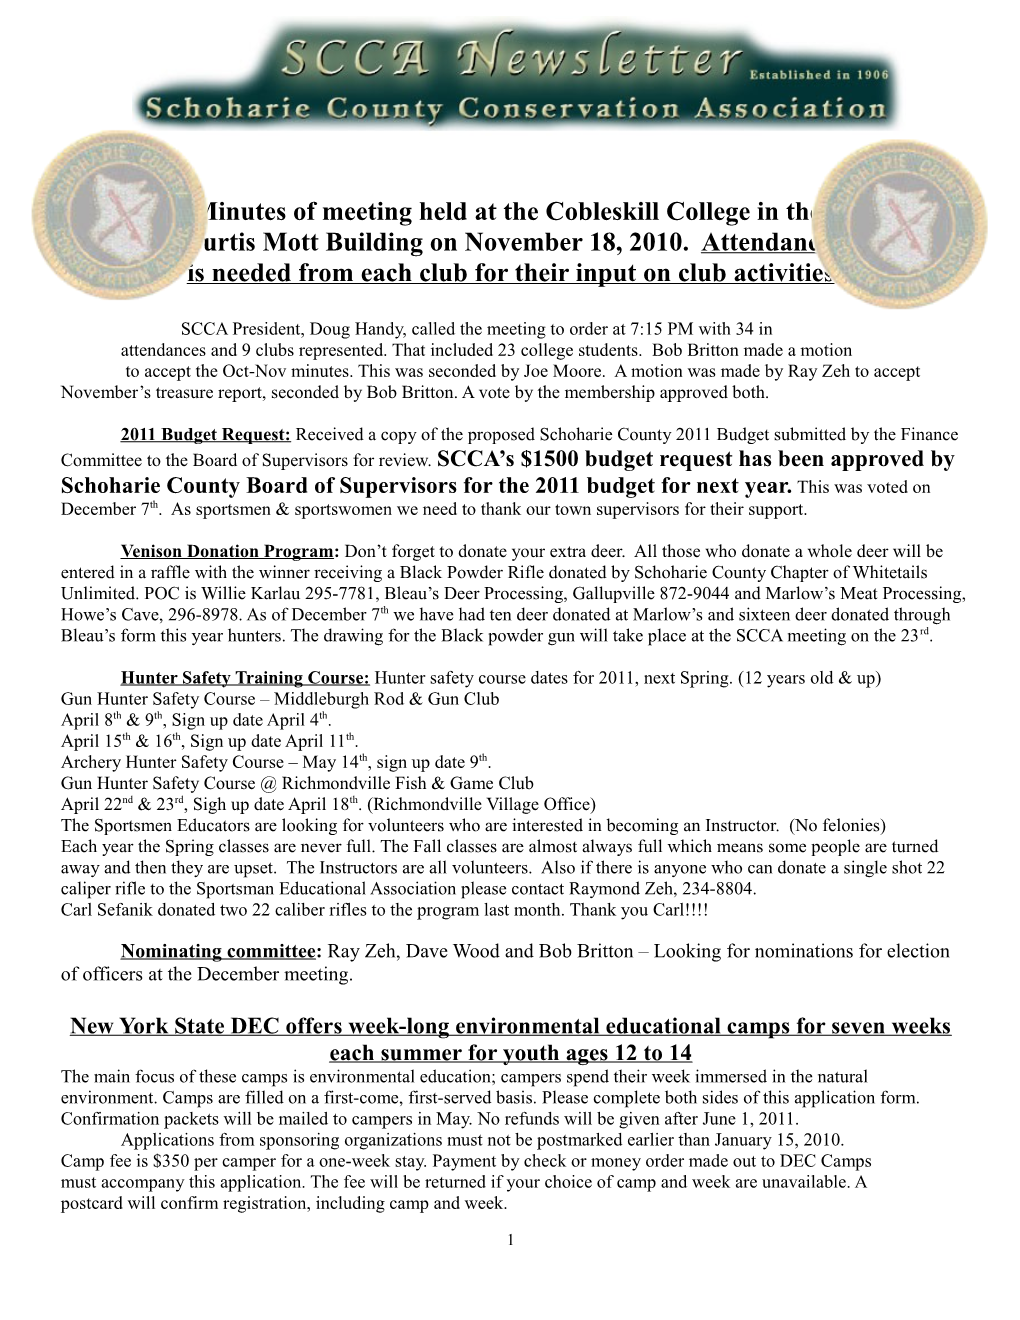 Minutes of Meeting Held at the Cobleskillcollege in The